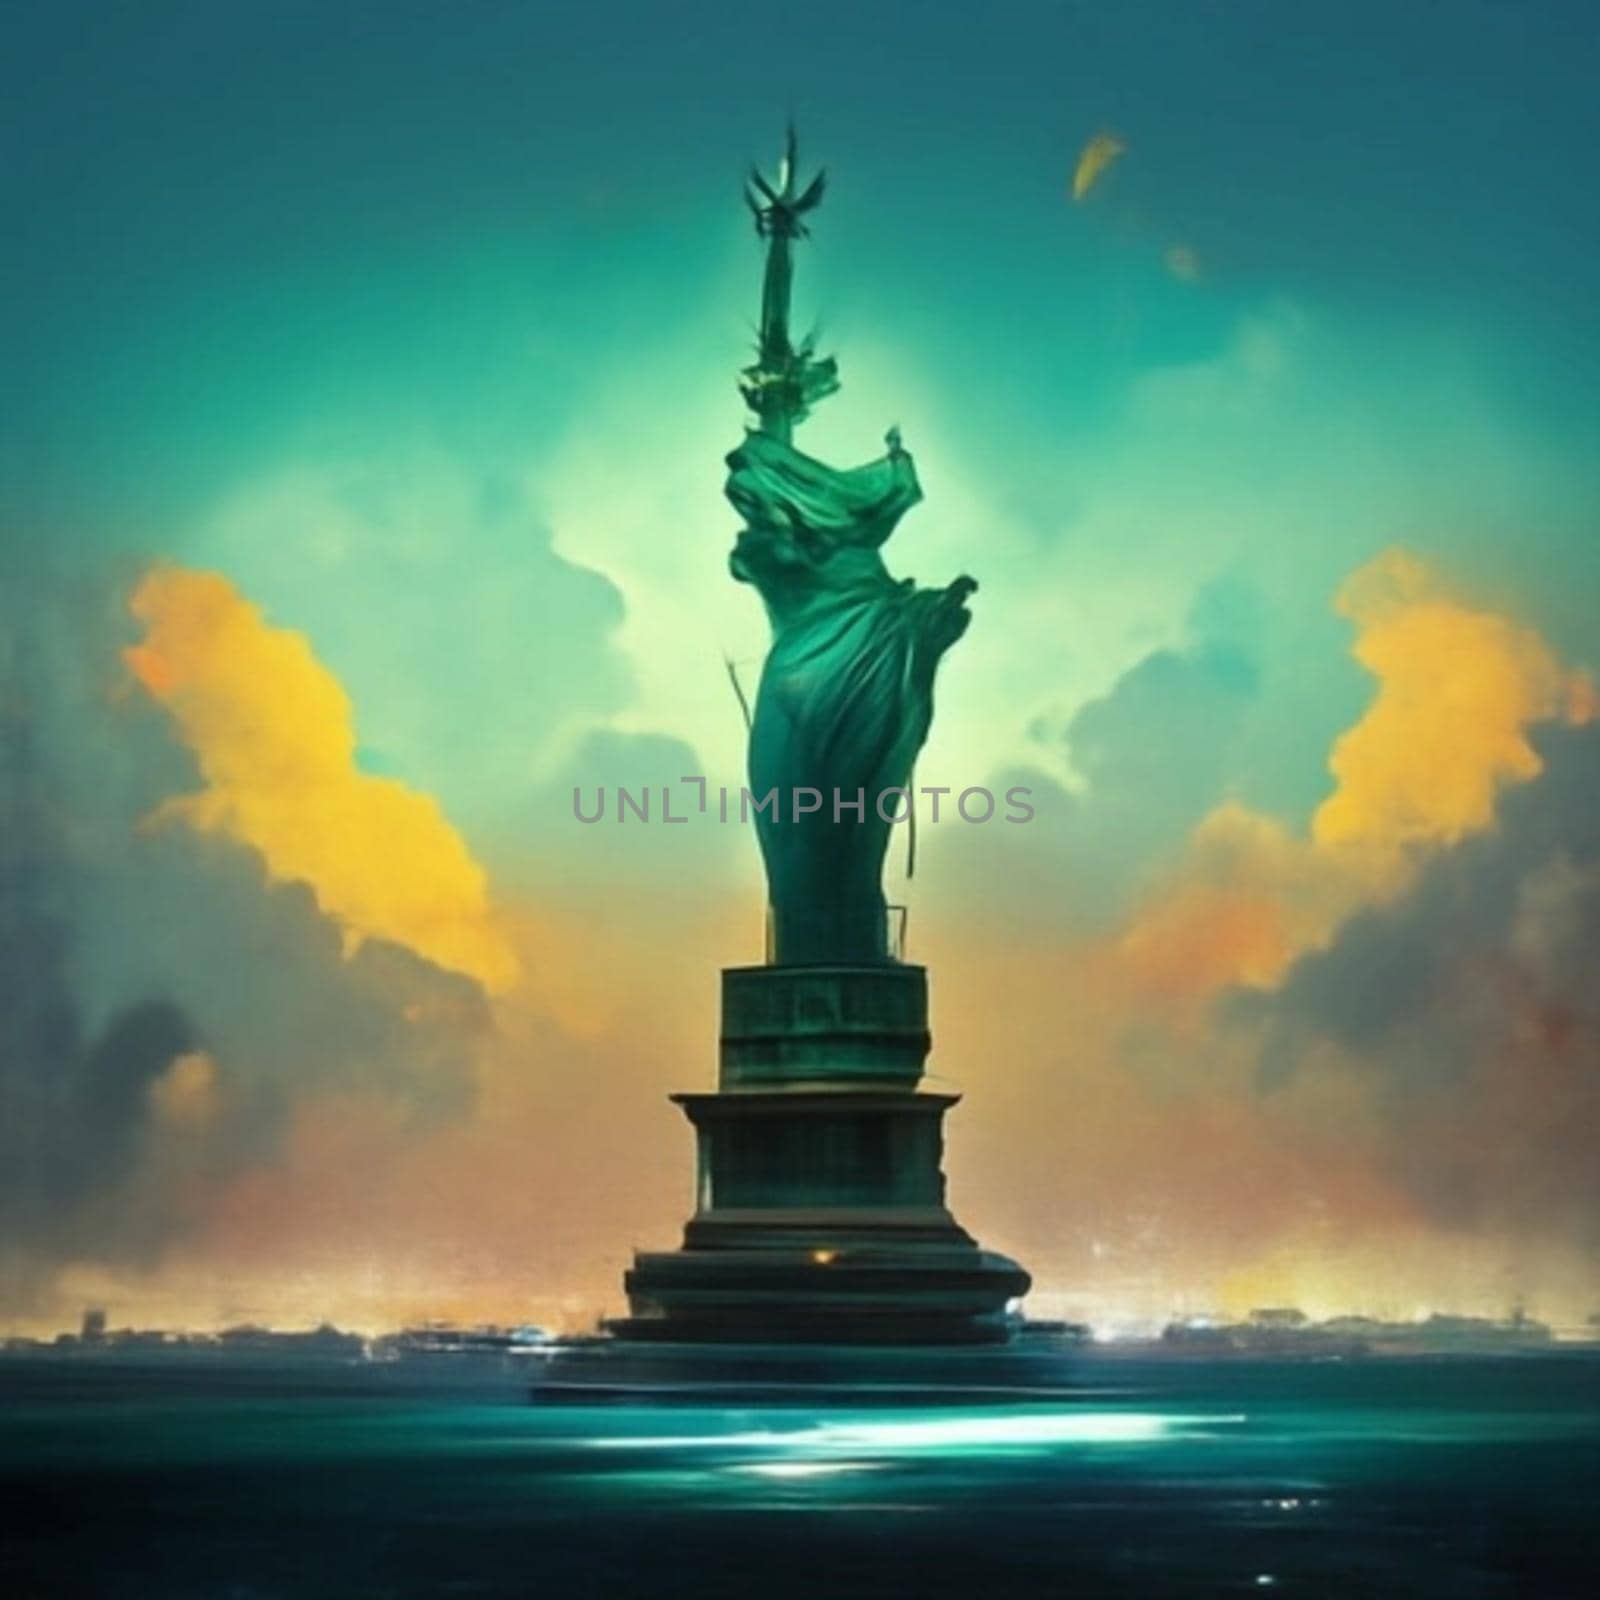 USA inscription and statue of liberty by architectphd